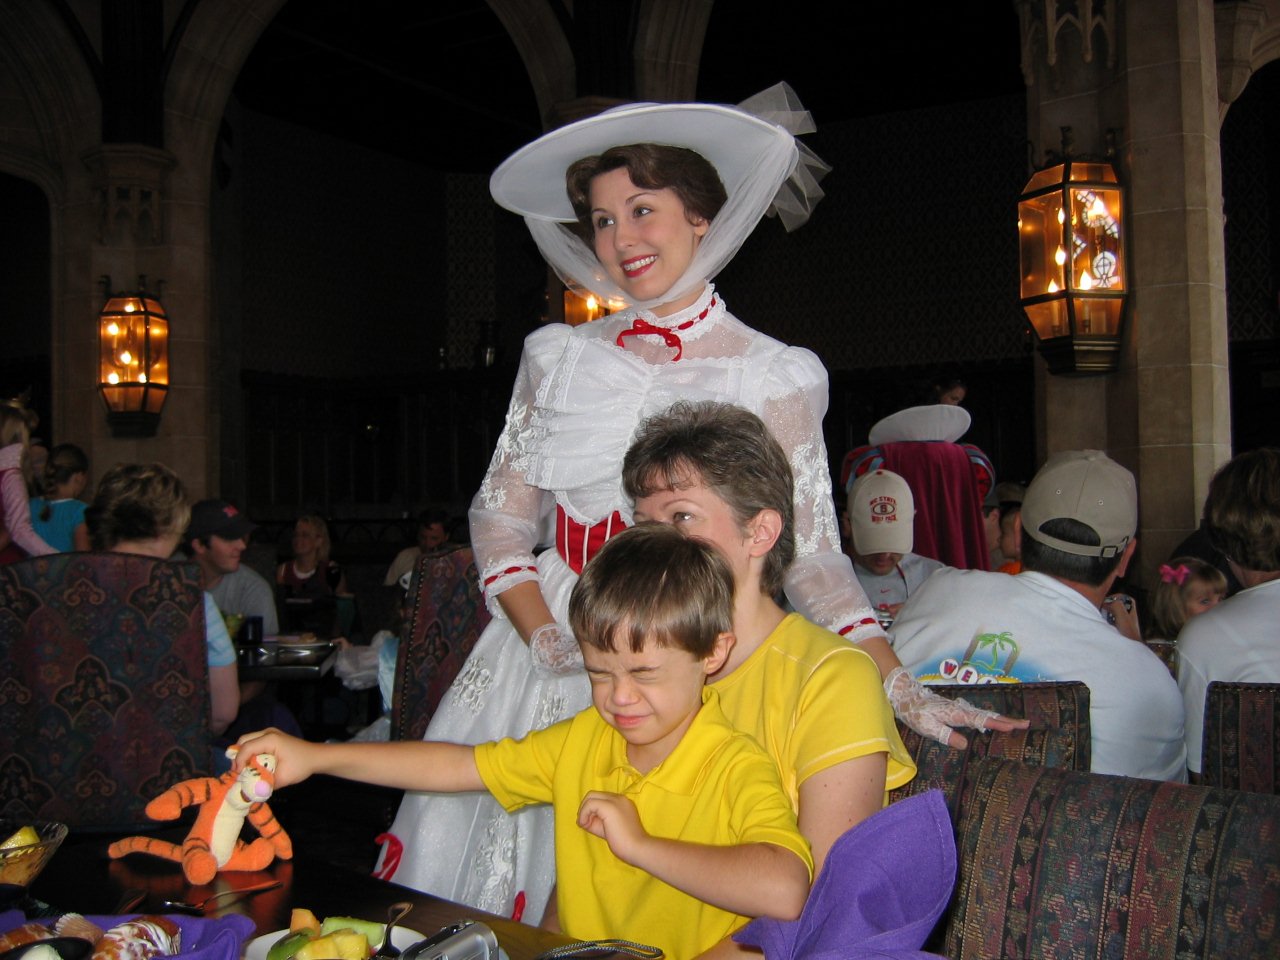 Cinderella's Castle with Mary Poppins